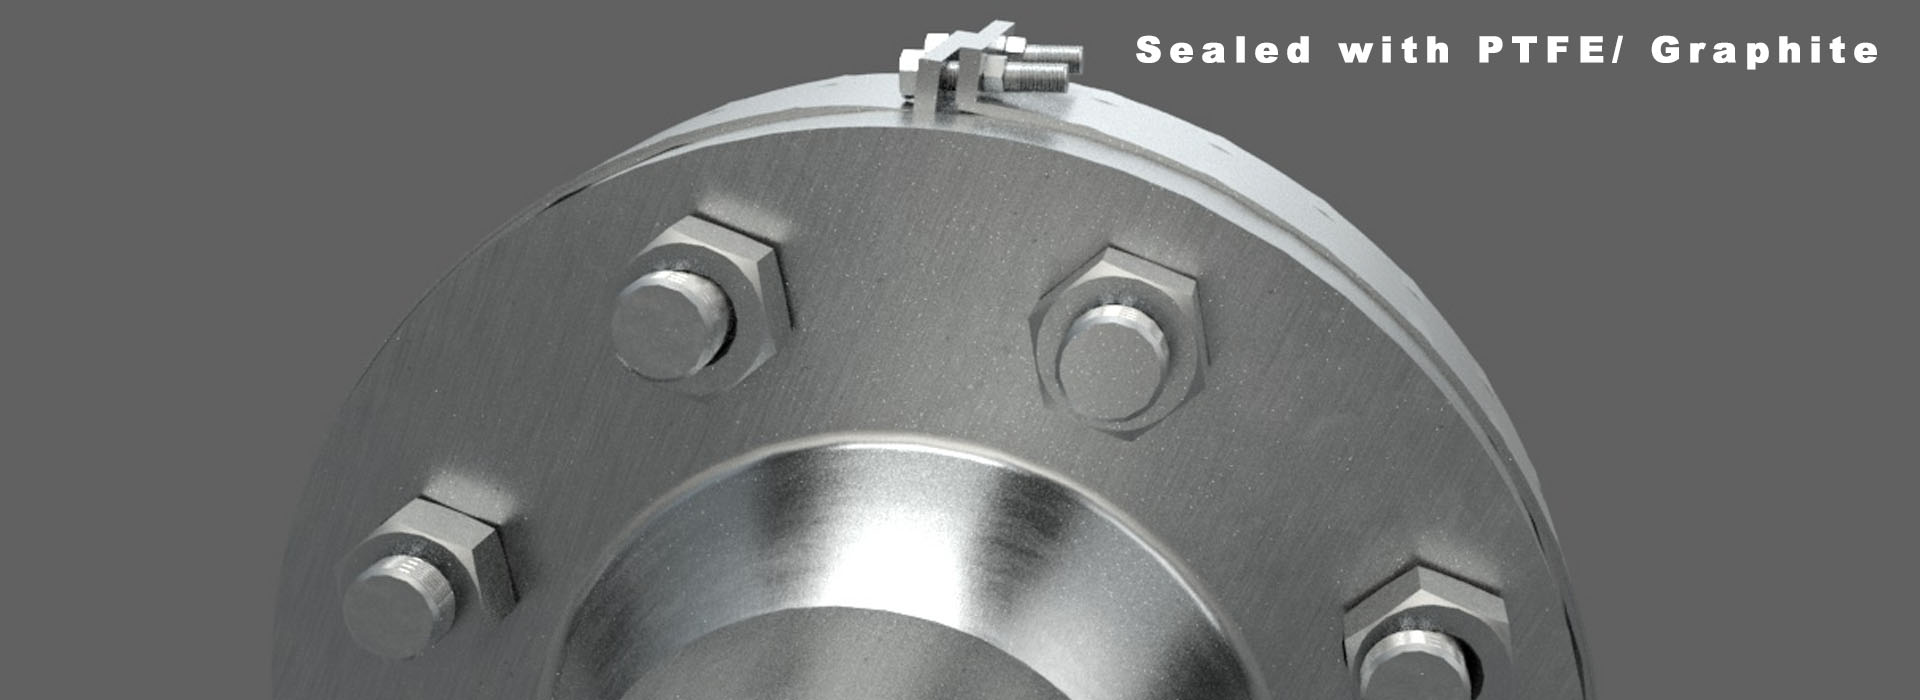 flange guards sealed with PTFE